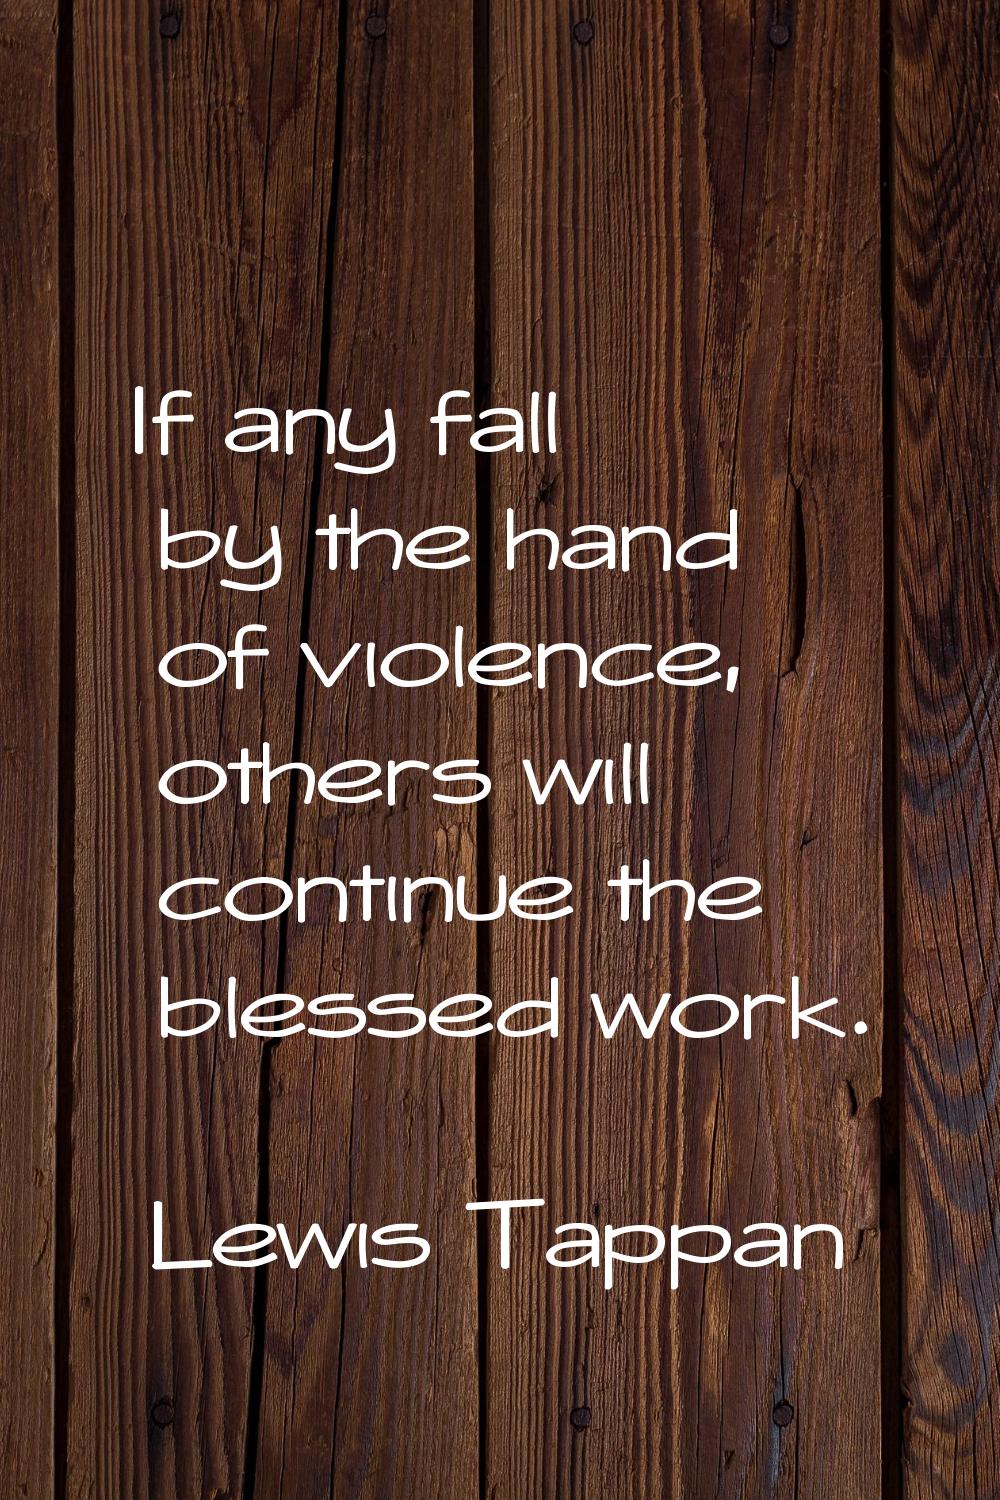 If any fall by the hand of violence, others will continue the blessed work.